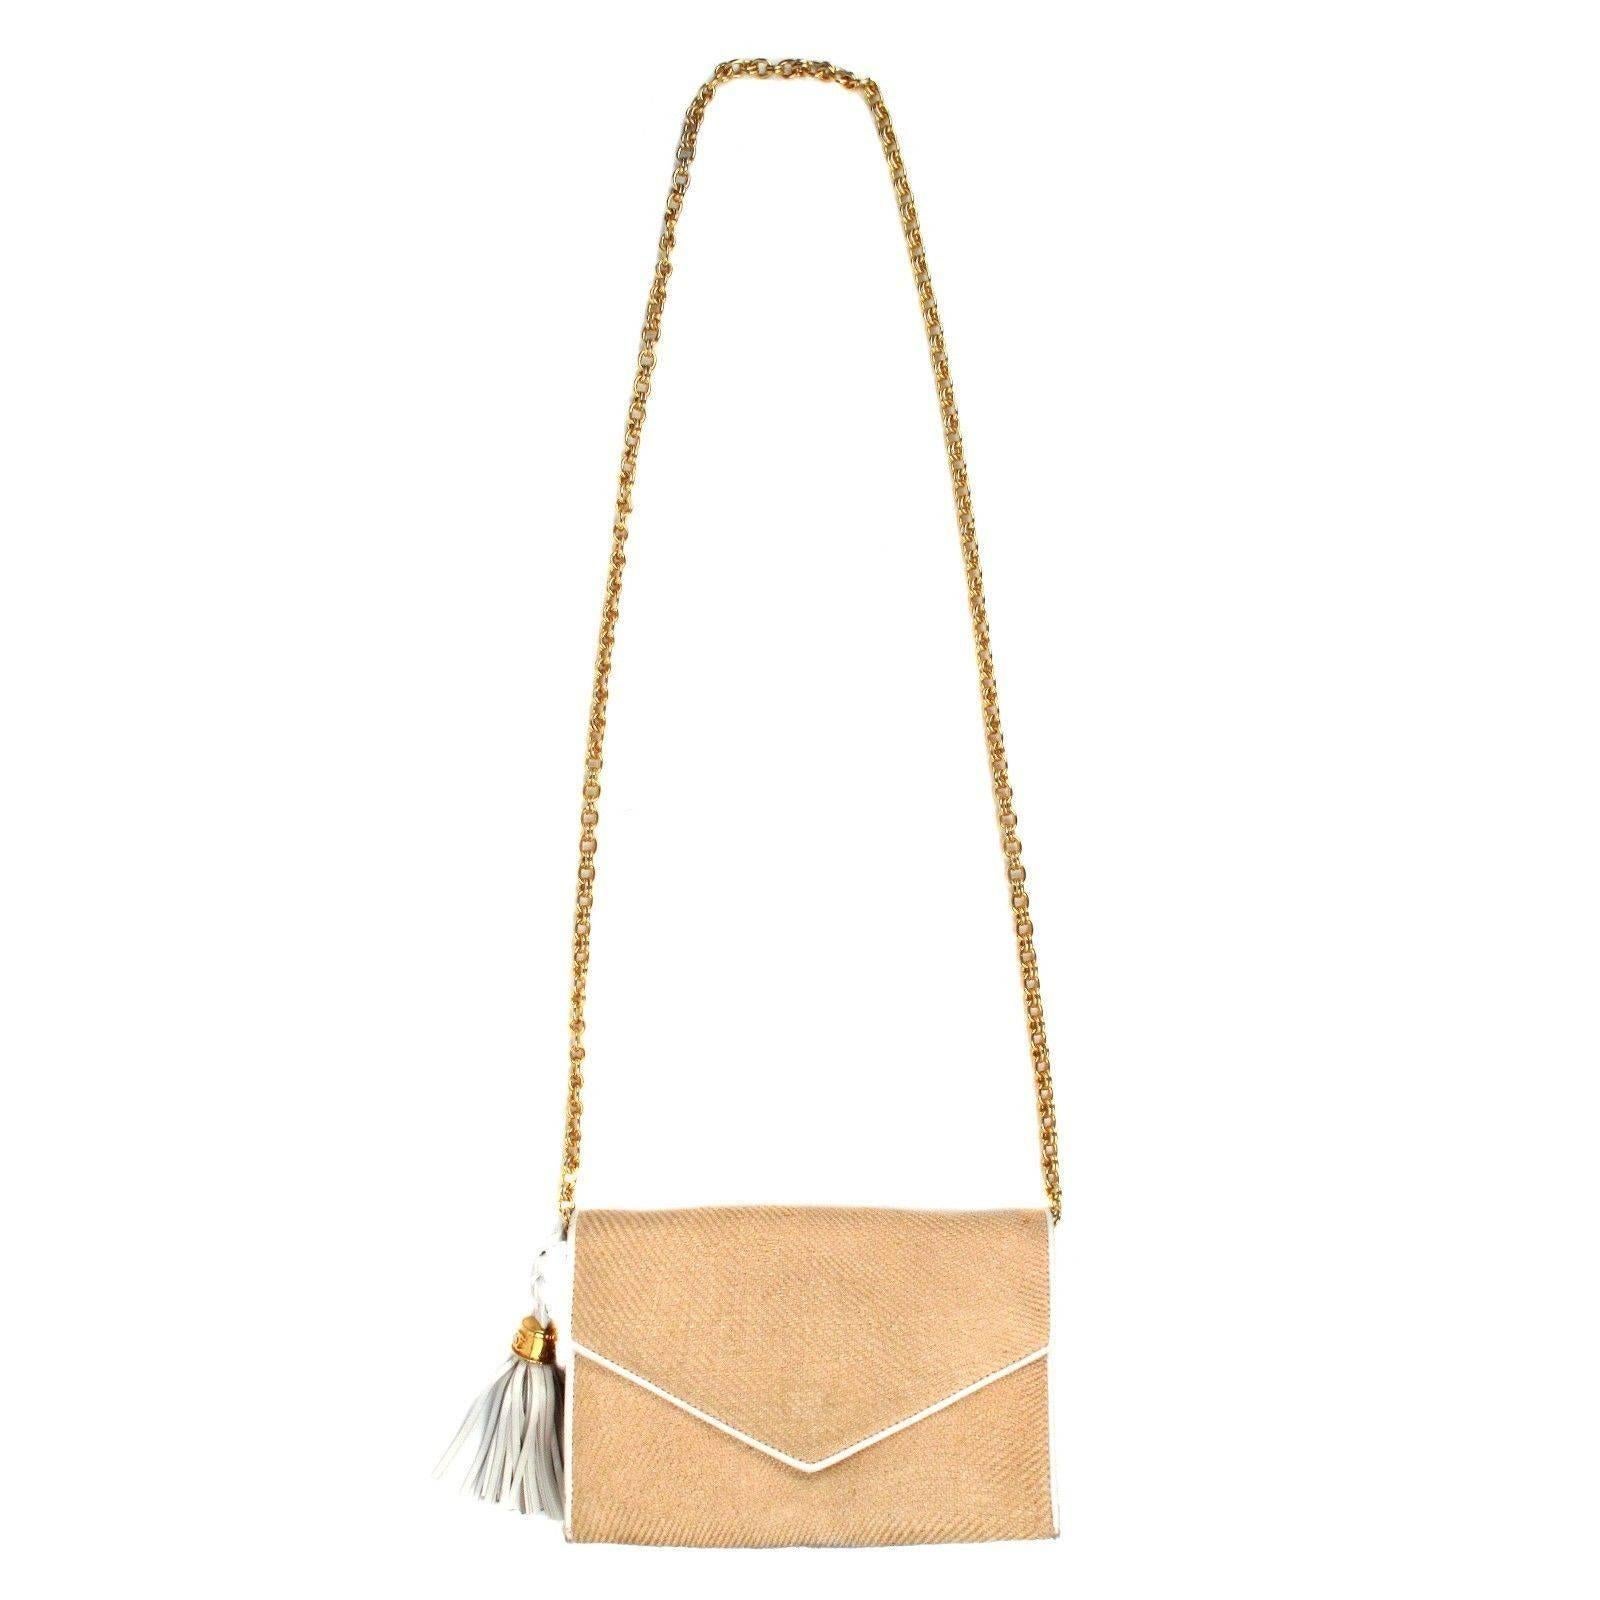 Chanel - Wallet on a Chain Bag

Color: Tan

Material: Straw

------------------------------------------------------------

Details:

- chain shoulder strap

- CC logo at inside flap

- braided leather tassel charm

- magnetic